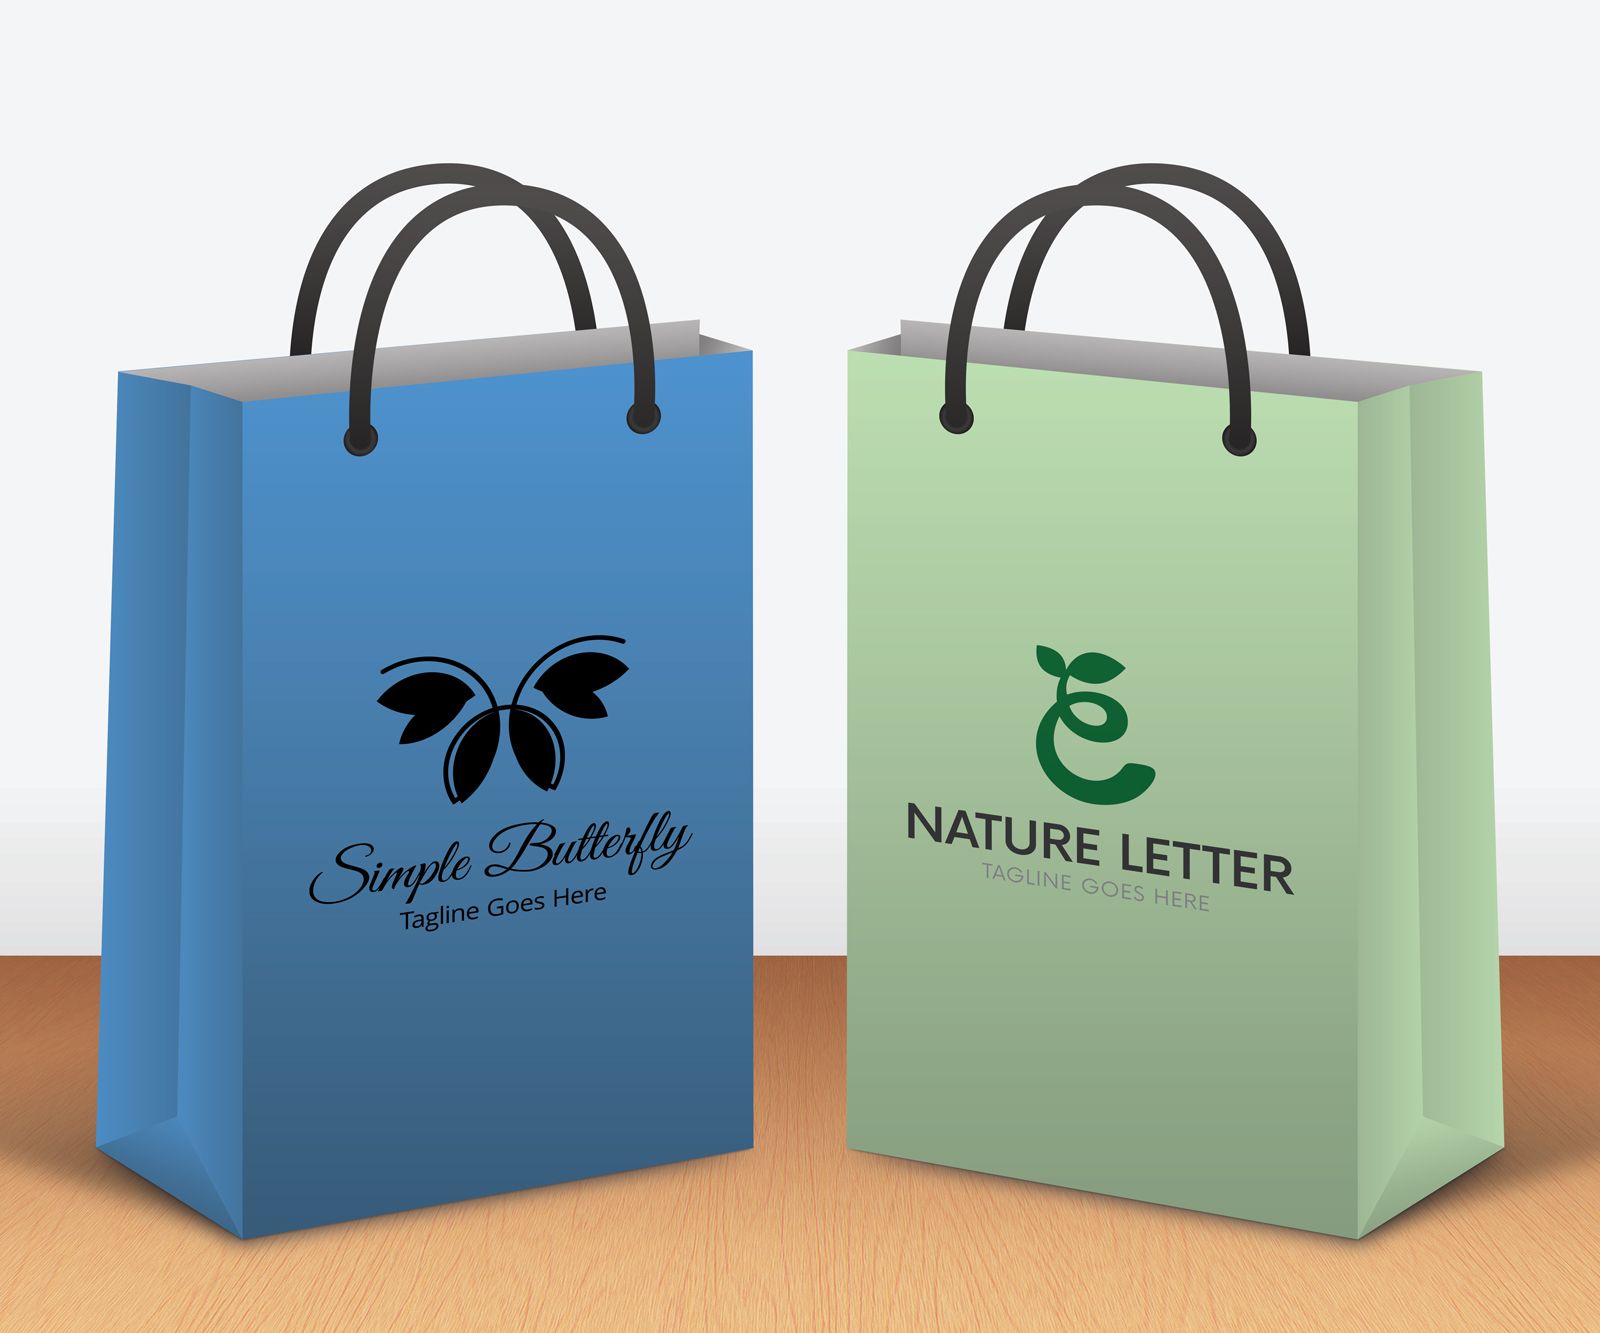 Download Paper Bag Product Mock-up by CMonica | Codester